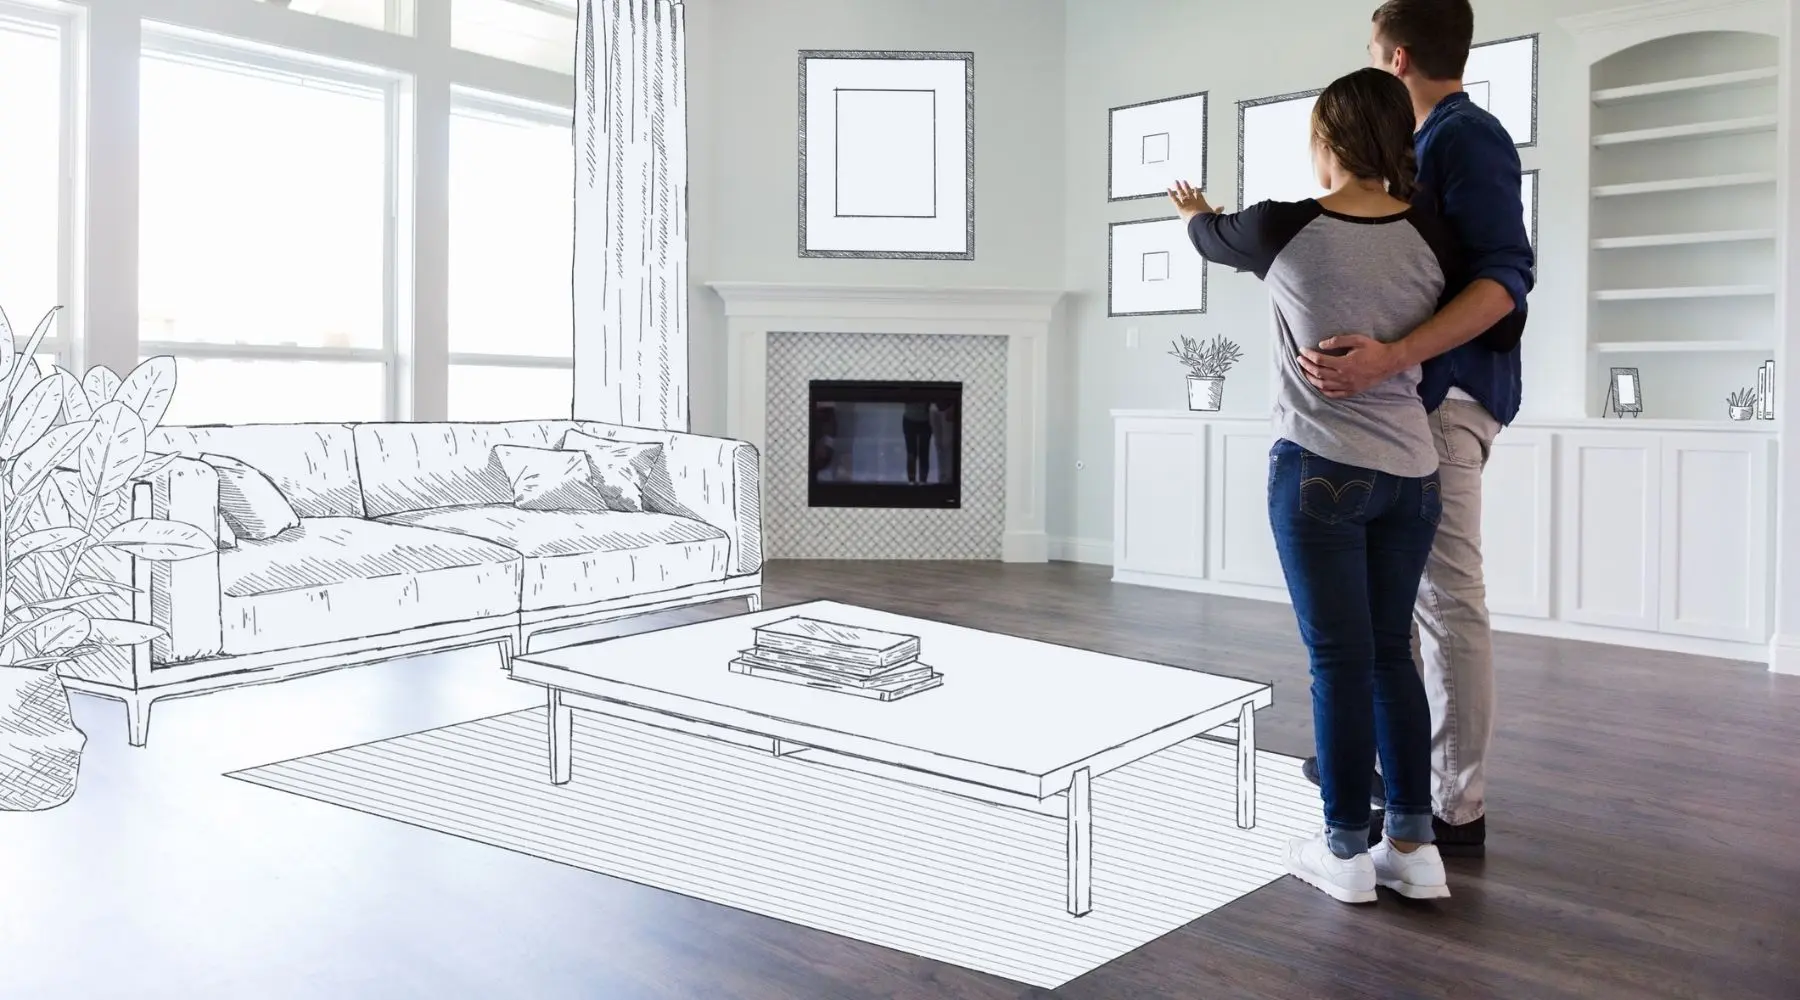 A young couple stand in the empty living room of their new home and imagine the room decor and furniture placement.